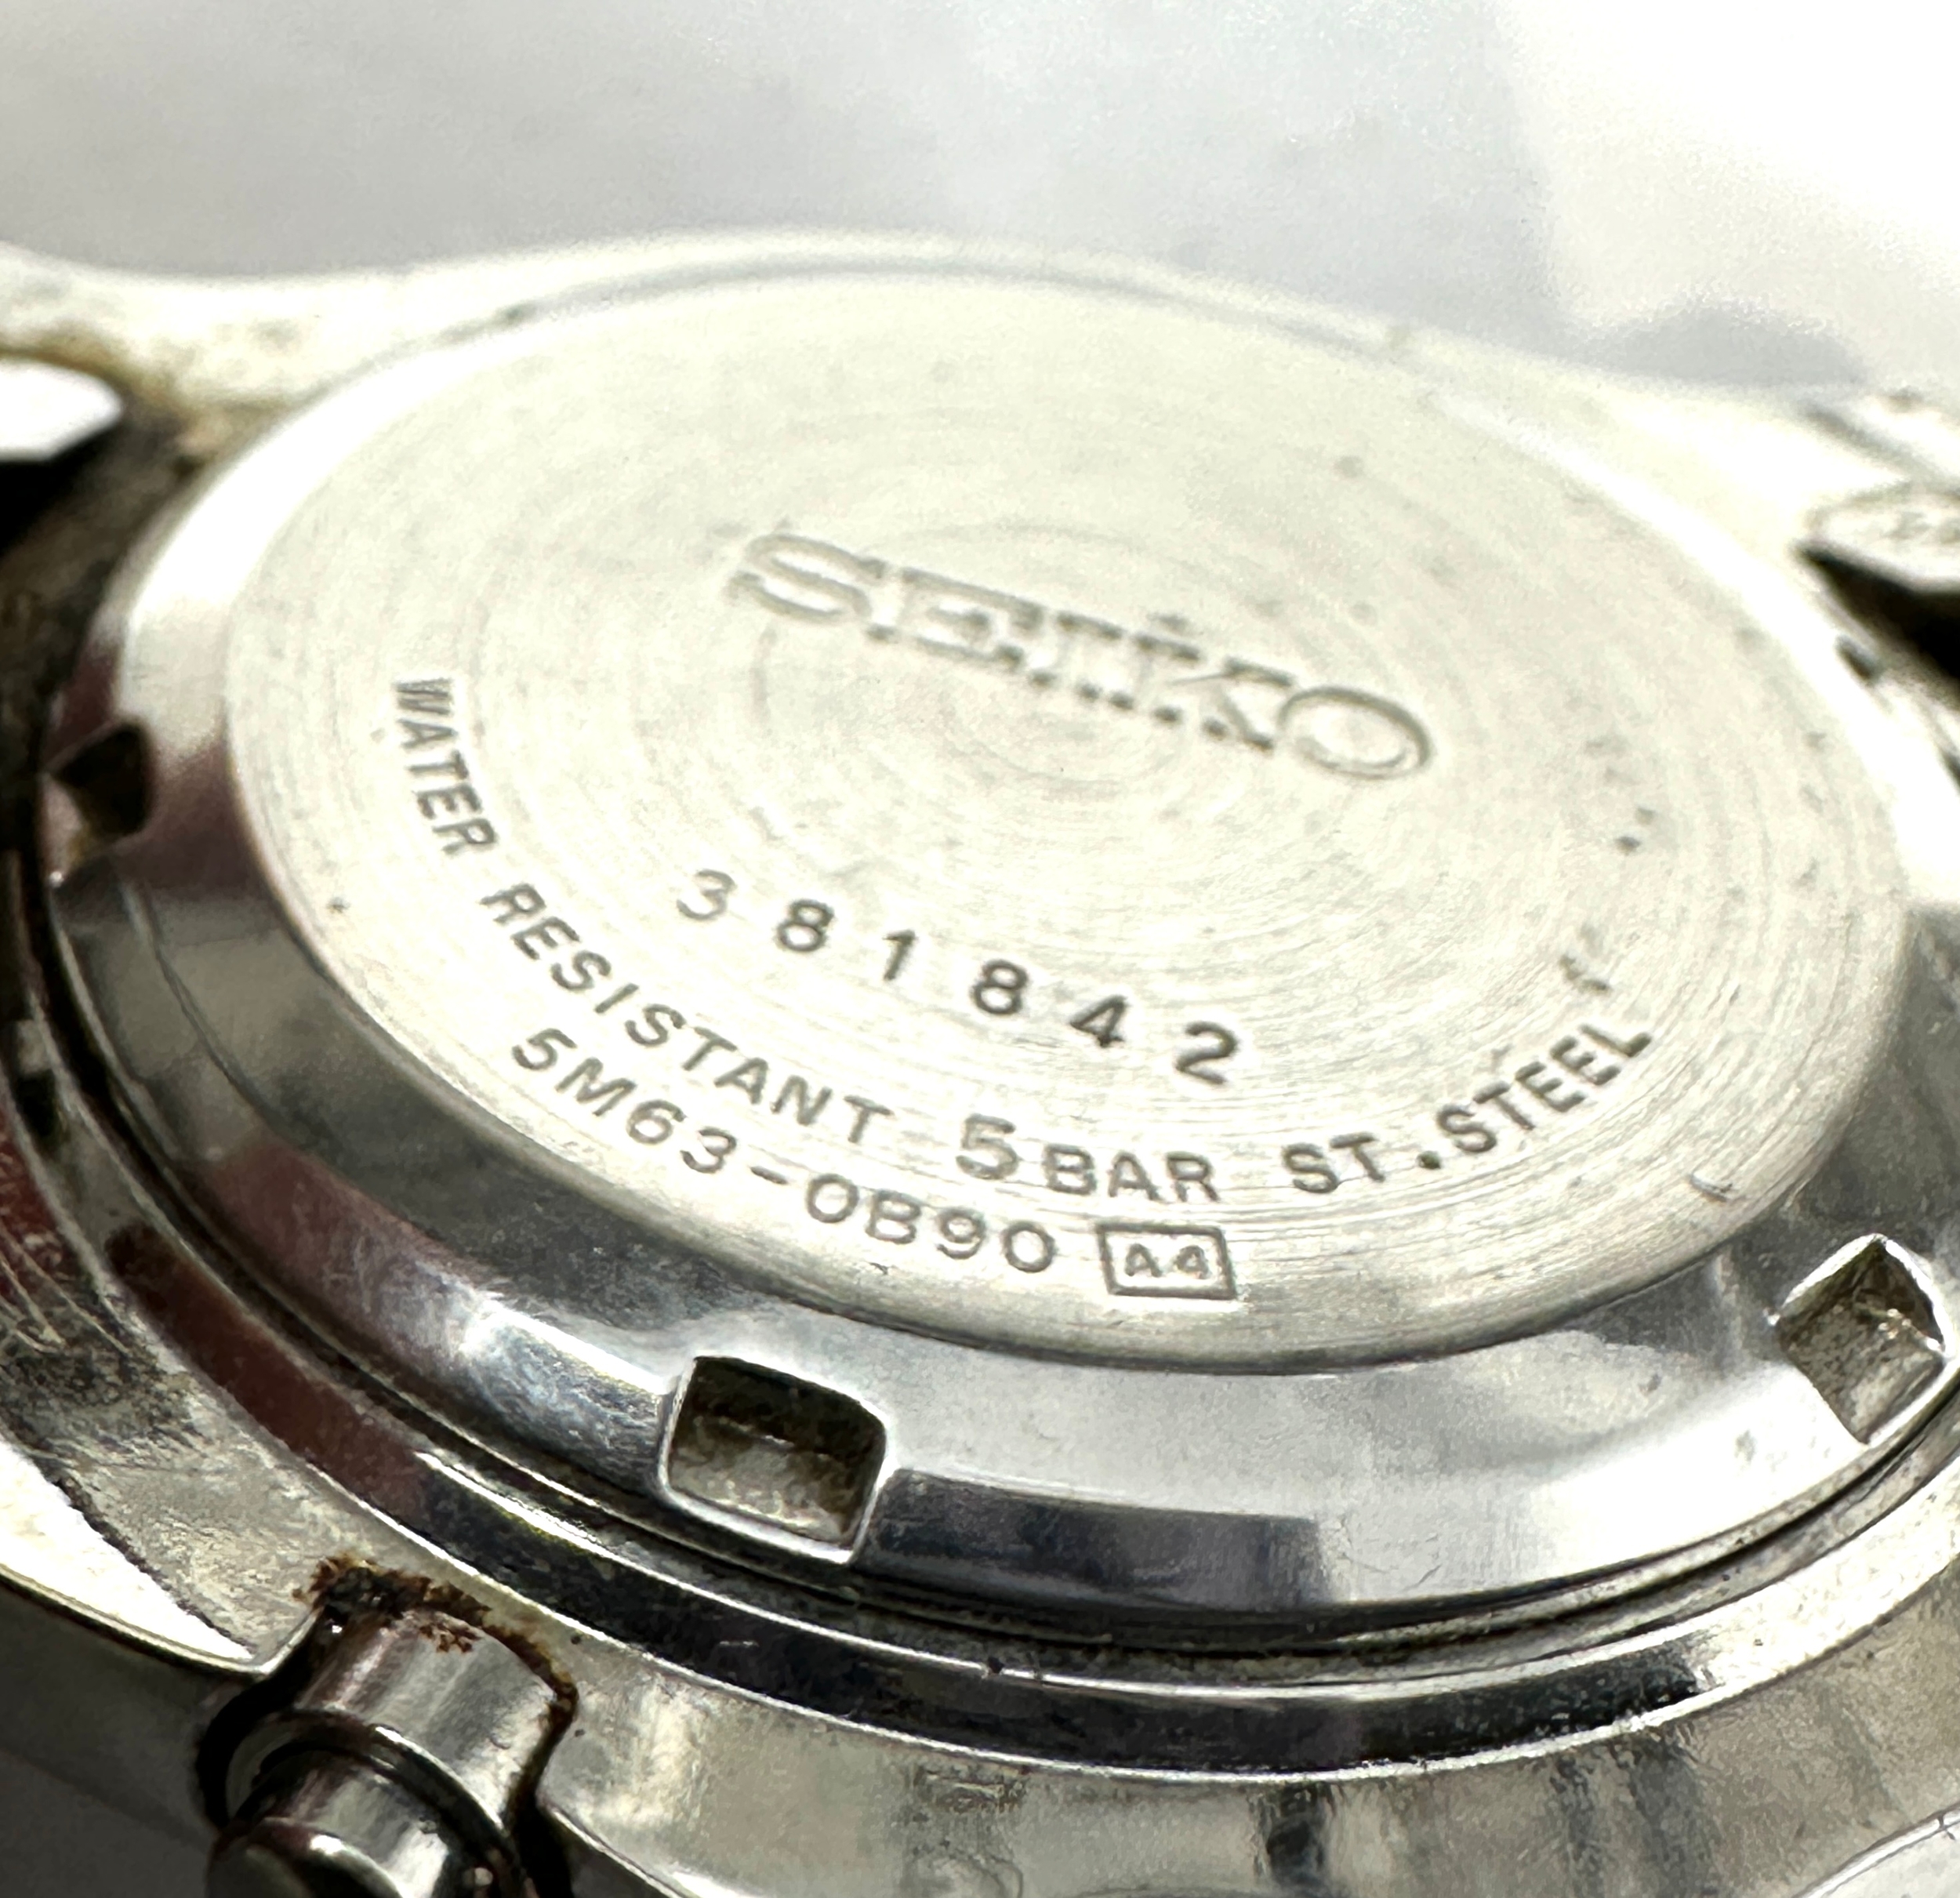 Gents Seiko Kinetic Watch 5M63-0B90 - 50m the watch is ticking - Image 6 of 6